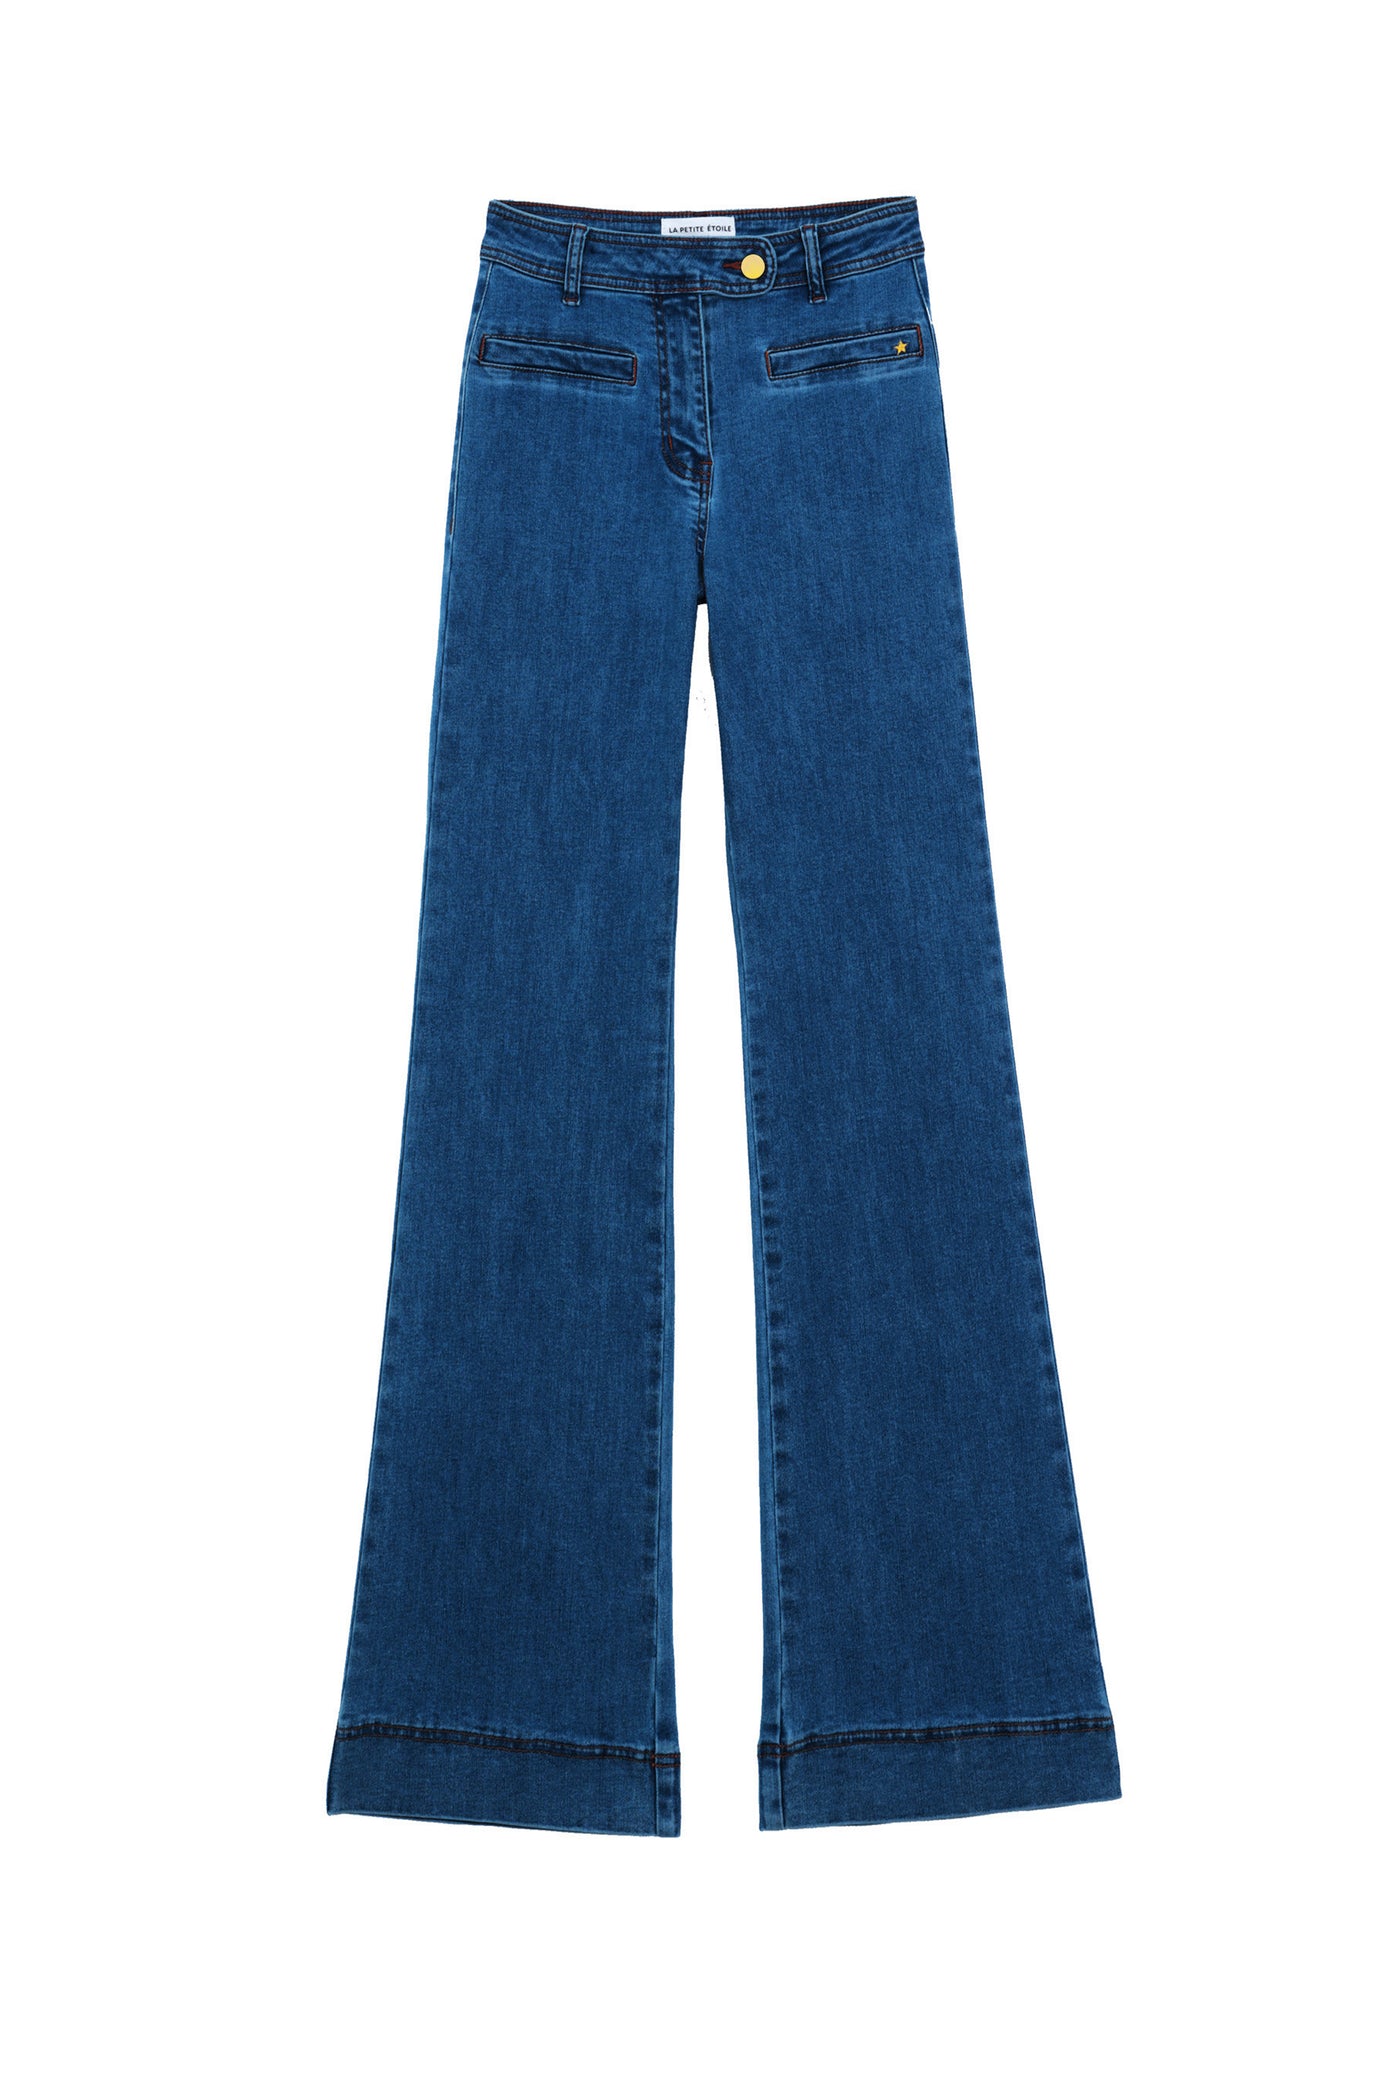 Jeans Marceo W - Wash